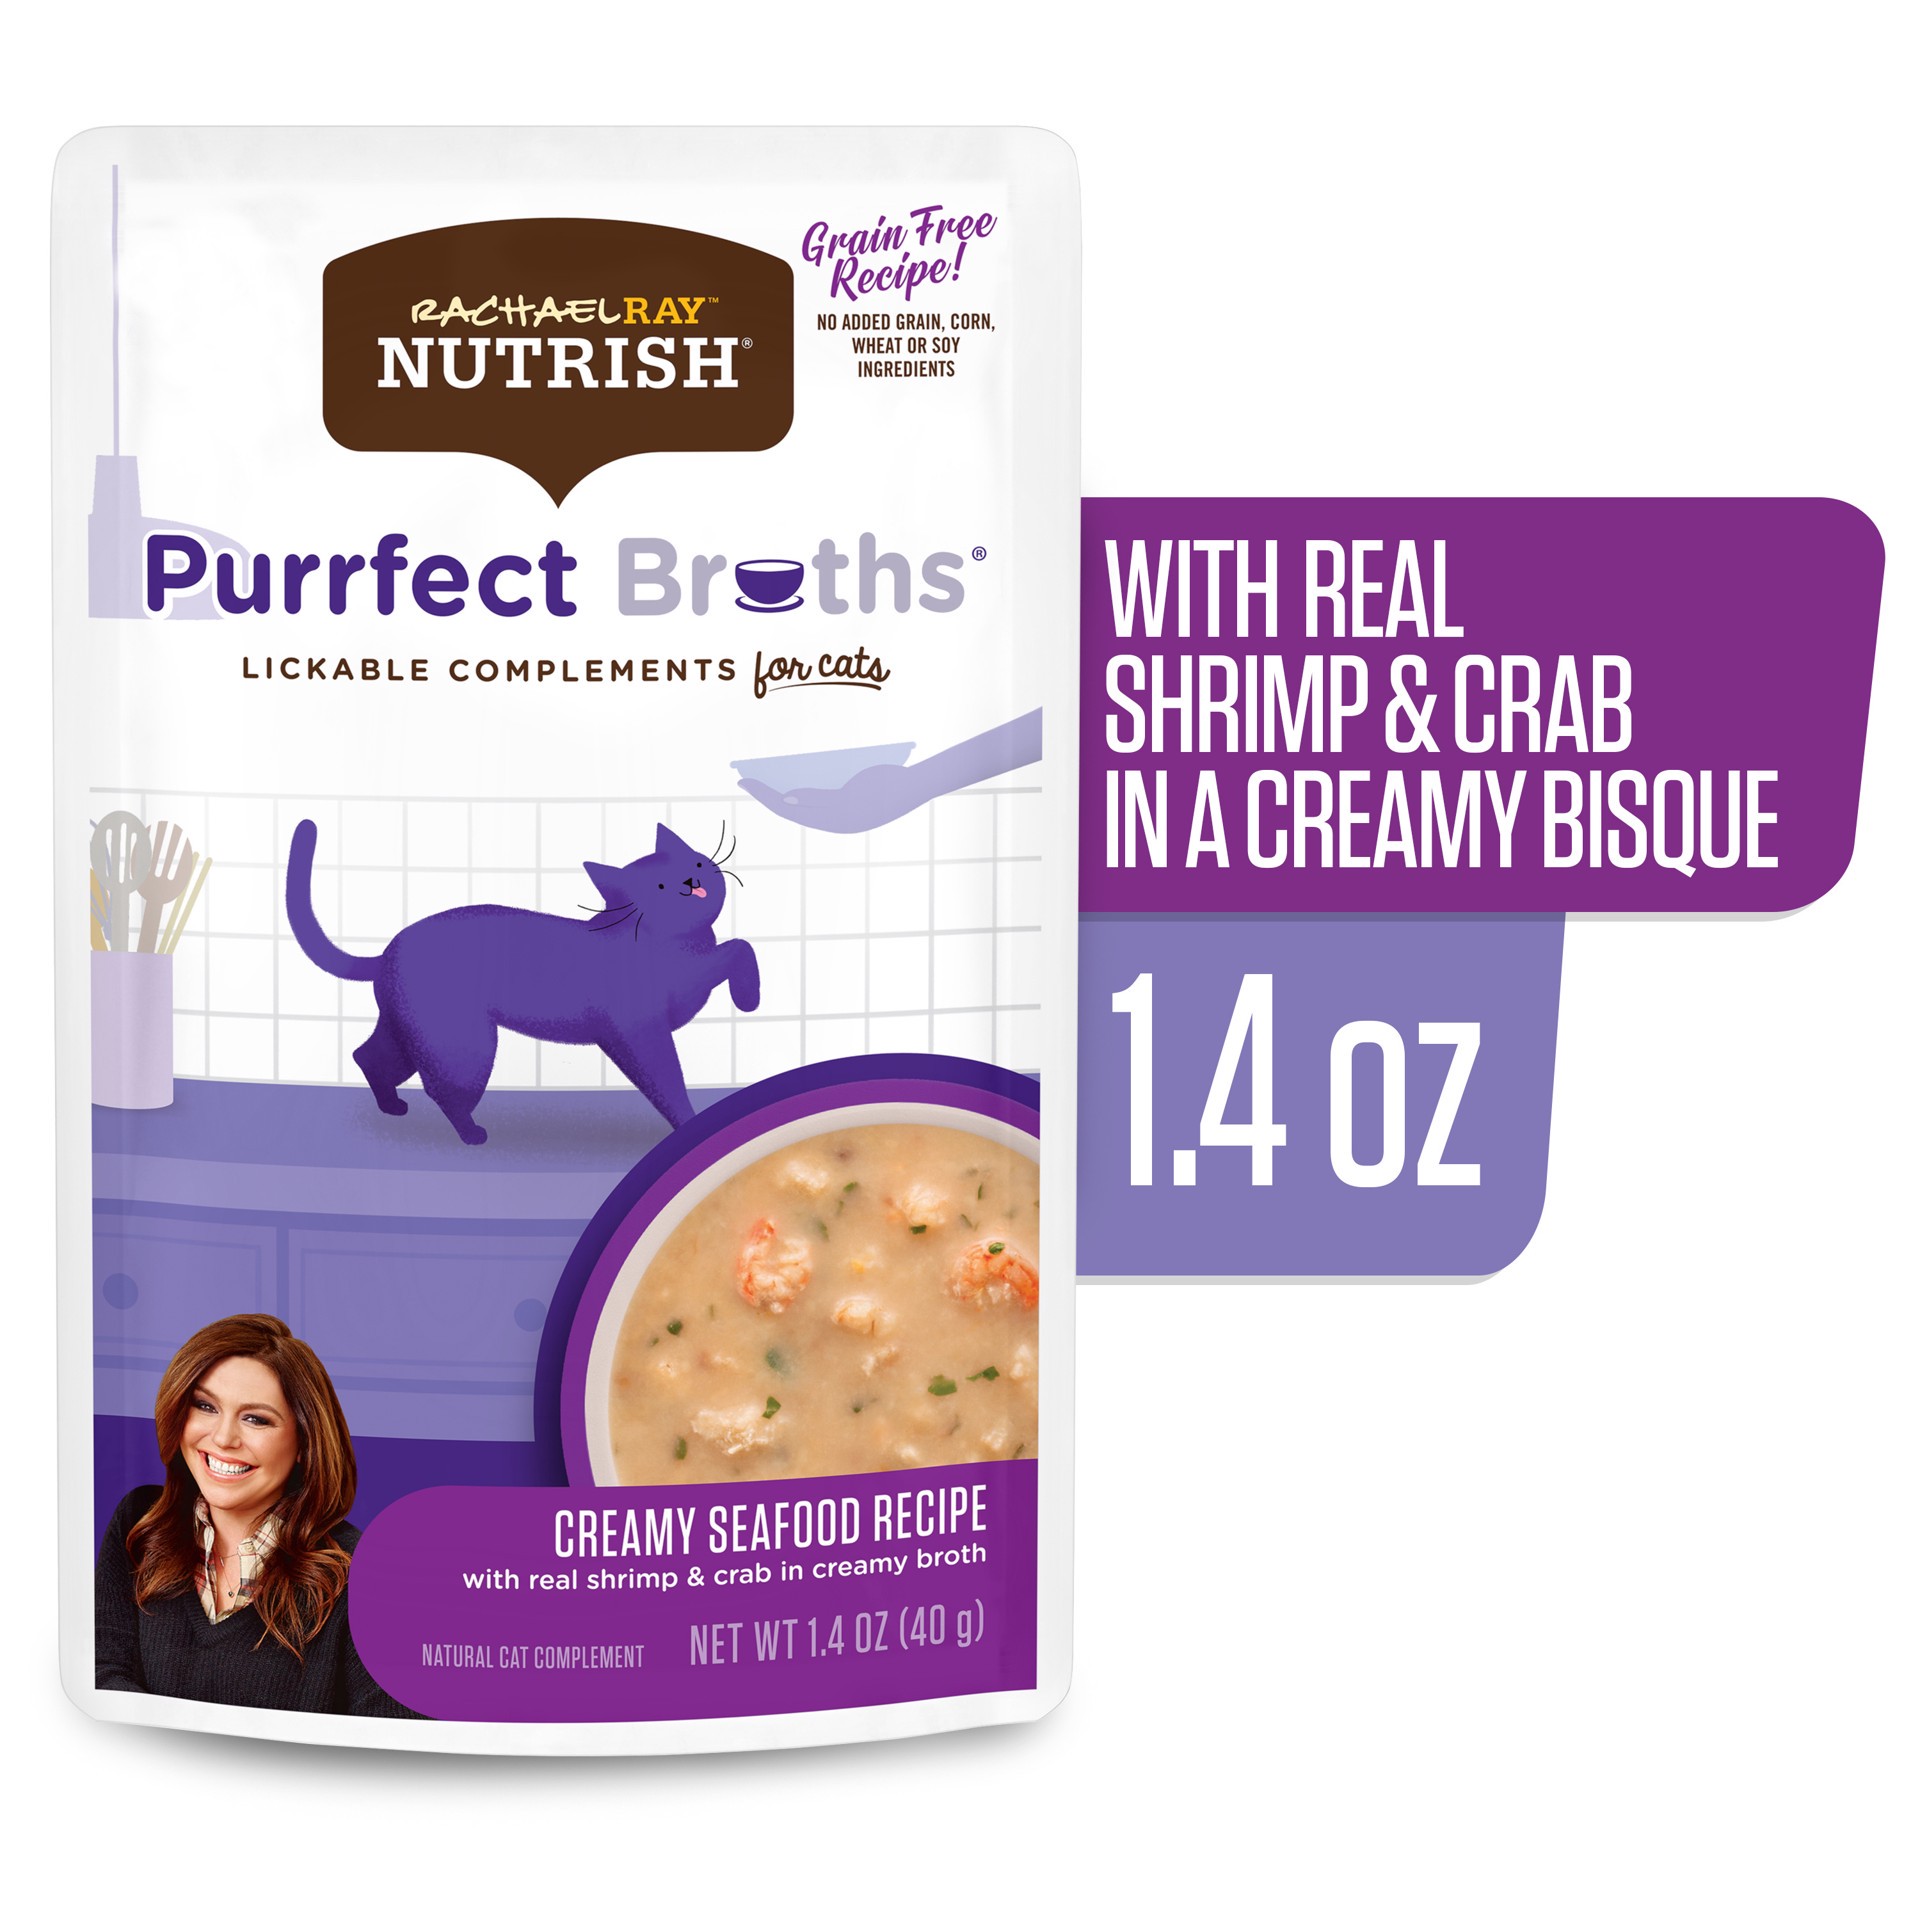 slide 4 of 6, Rachael Ray Nutrish Purrfect Broths Lickable Cat Treats and Meal Complements, Creamy Seafood Recipe, 1.4 Ounce Pouch, 1.4 oz